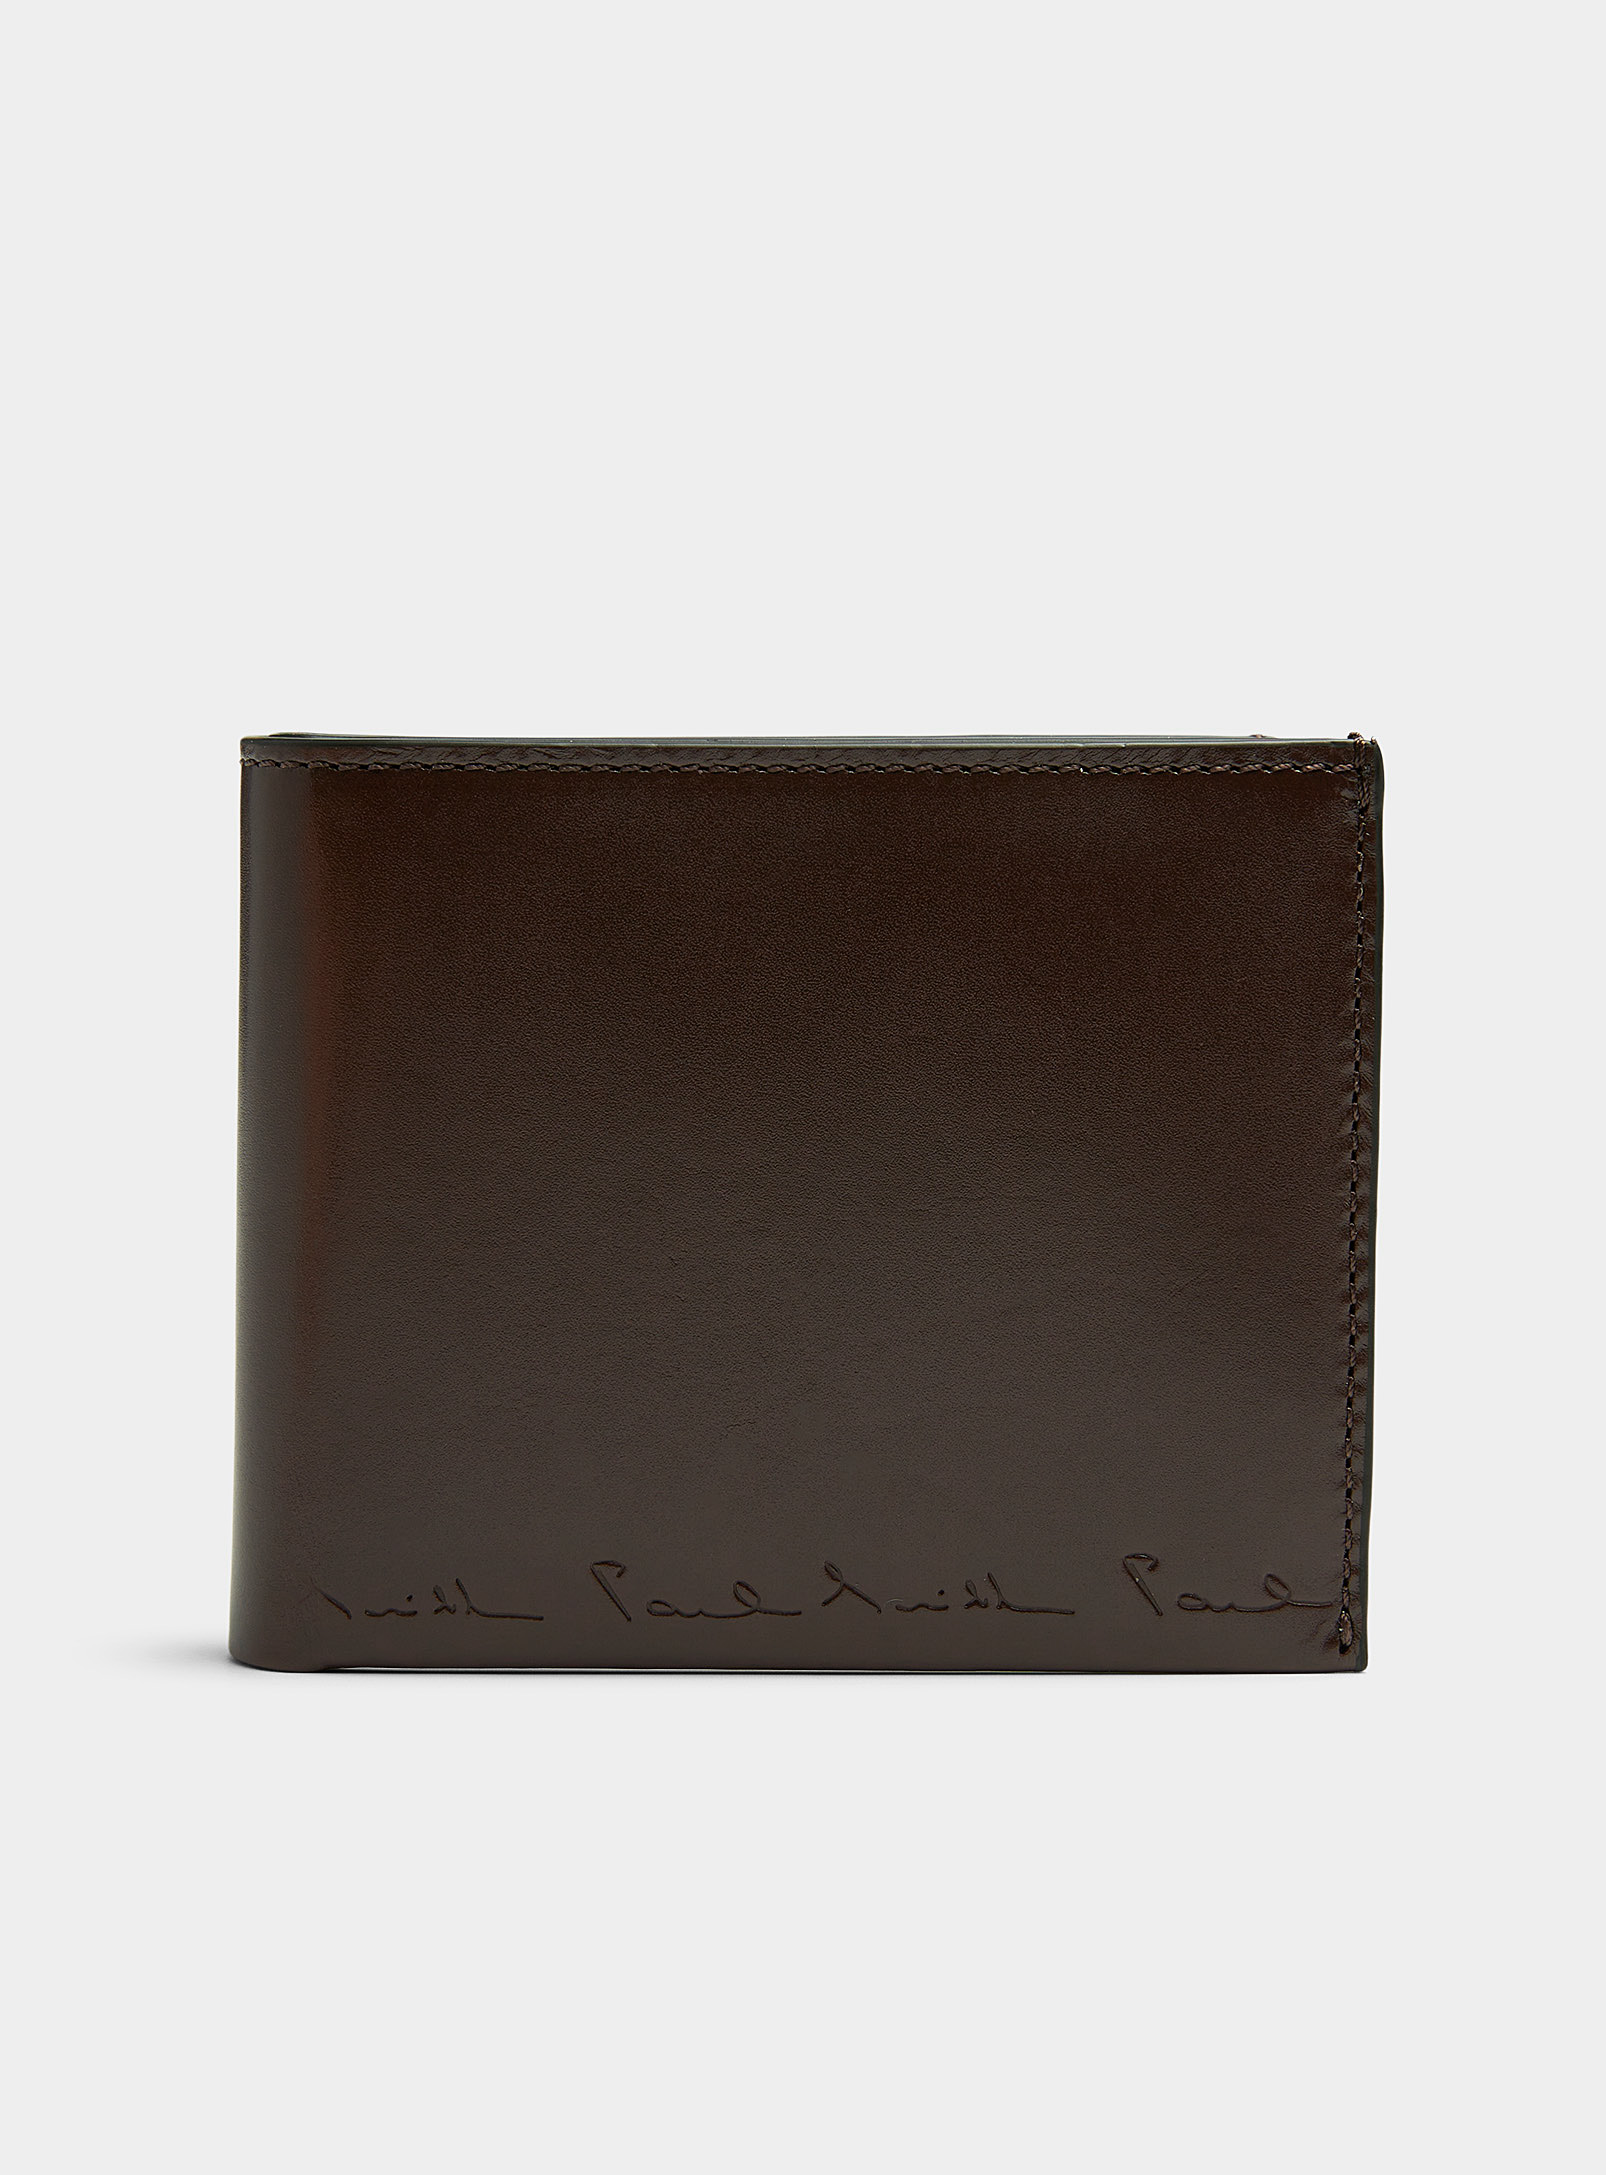 Paul Smith Smooth Brown Leather Wallet